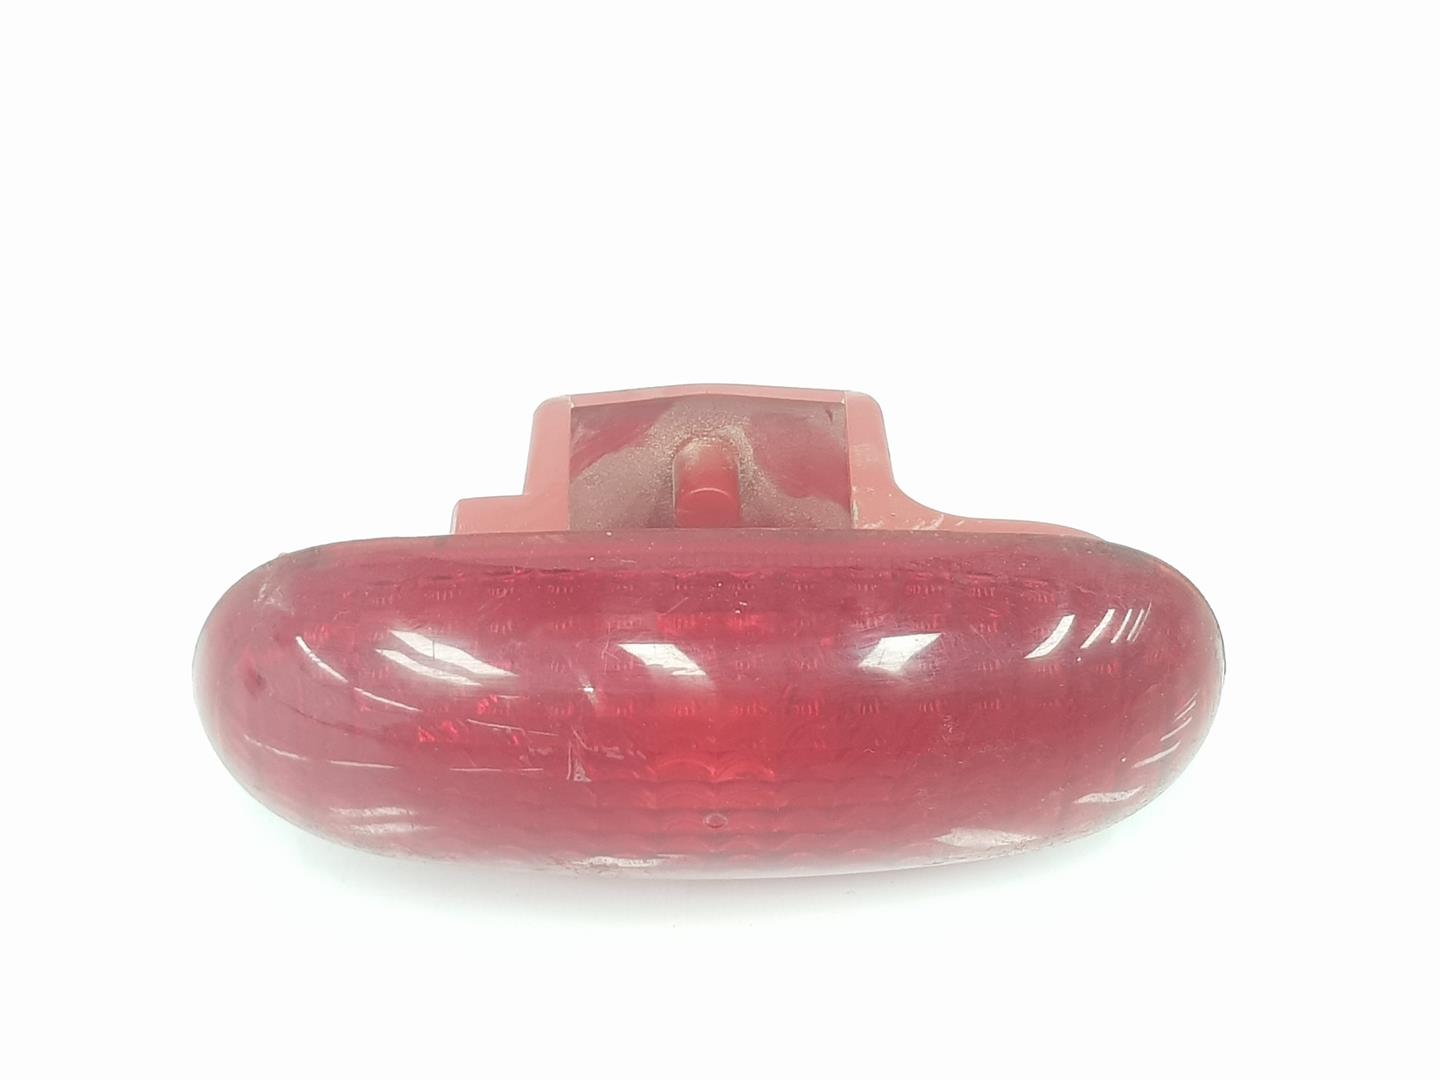 RENAULT Trafic 2 generation (2001-2015) Rear cover light 8200209522A, 8200209522 23501612